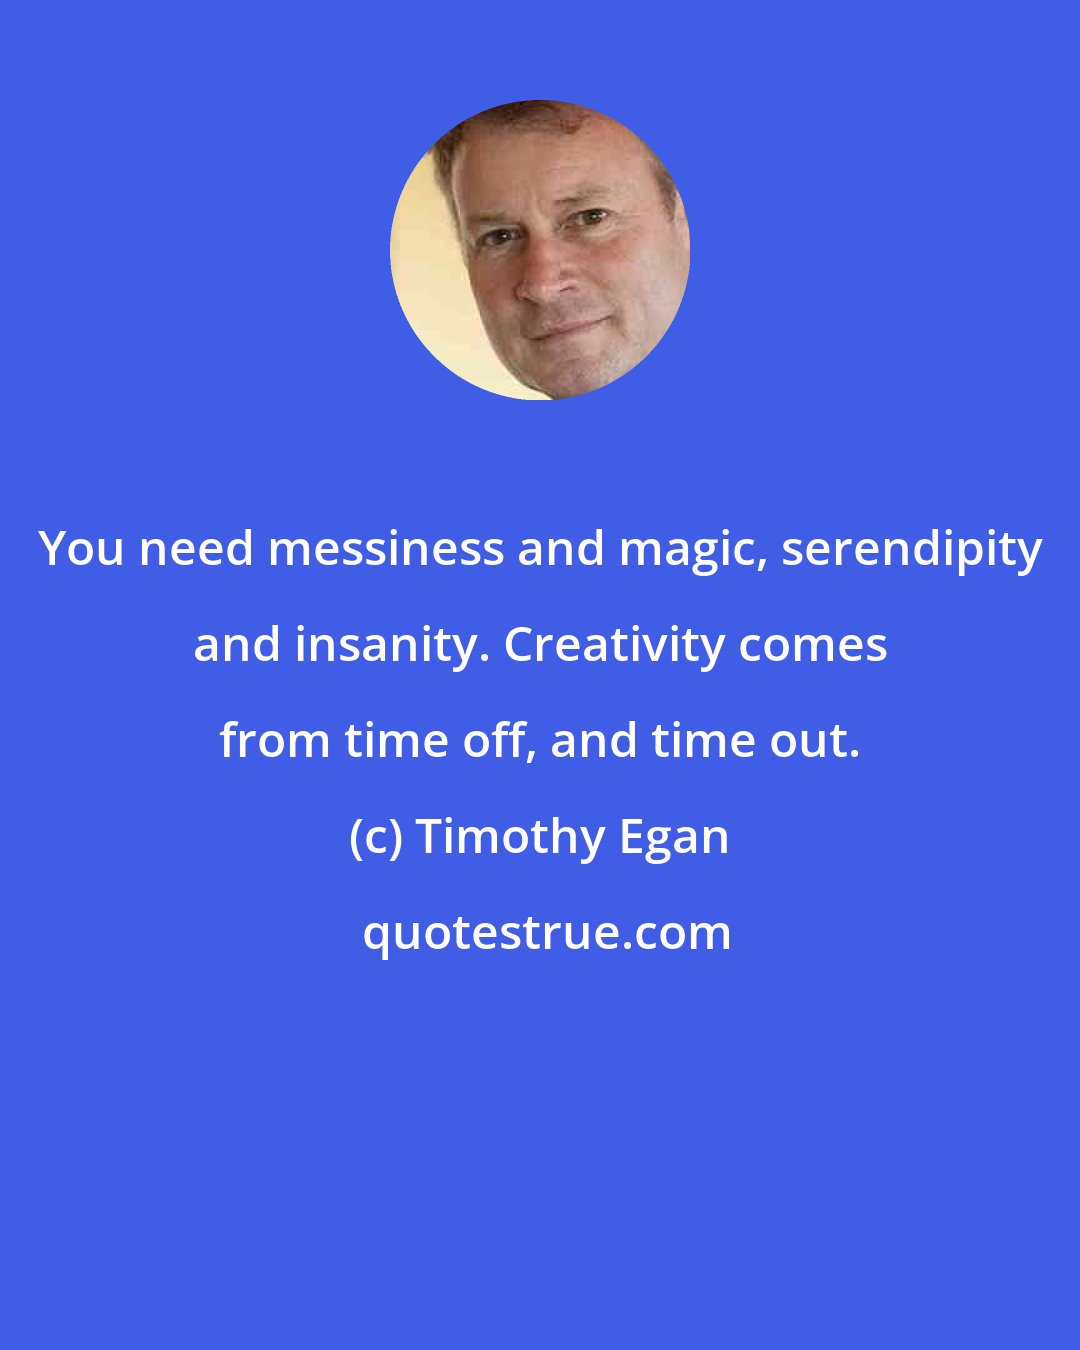 Timothy Egan: You need messiness and magic, serendipity and insanity. Creativity comes from time off, and time out.